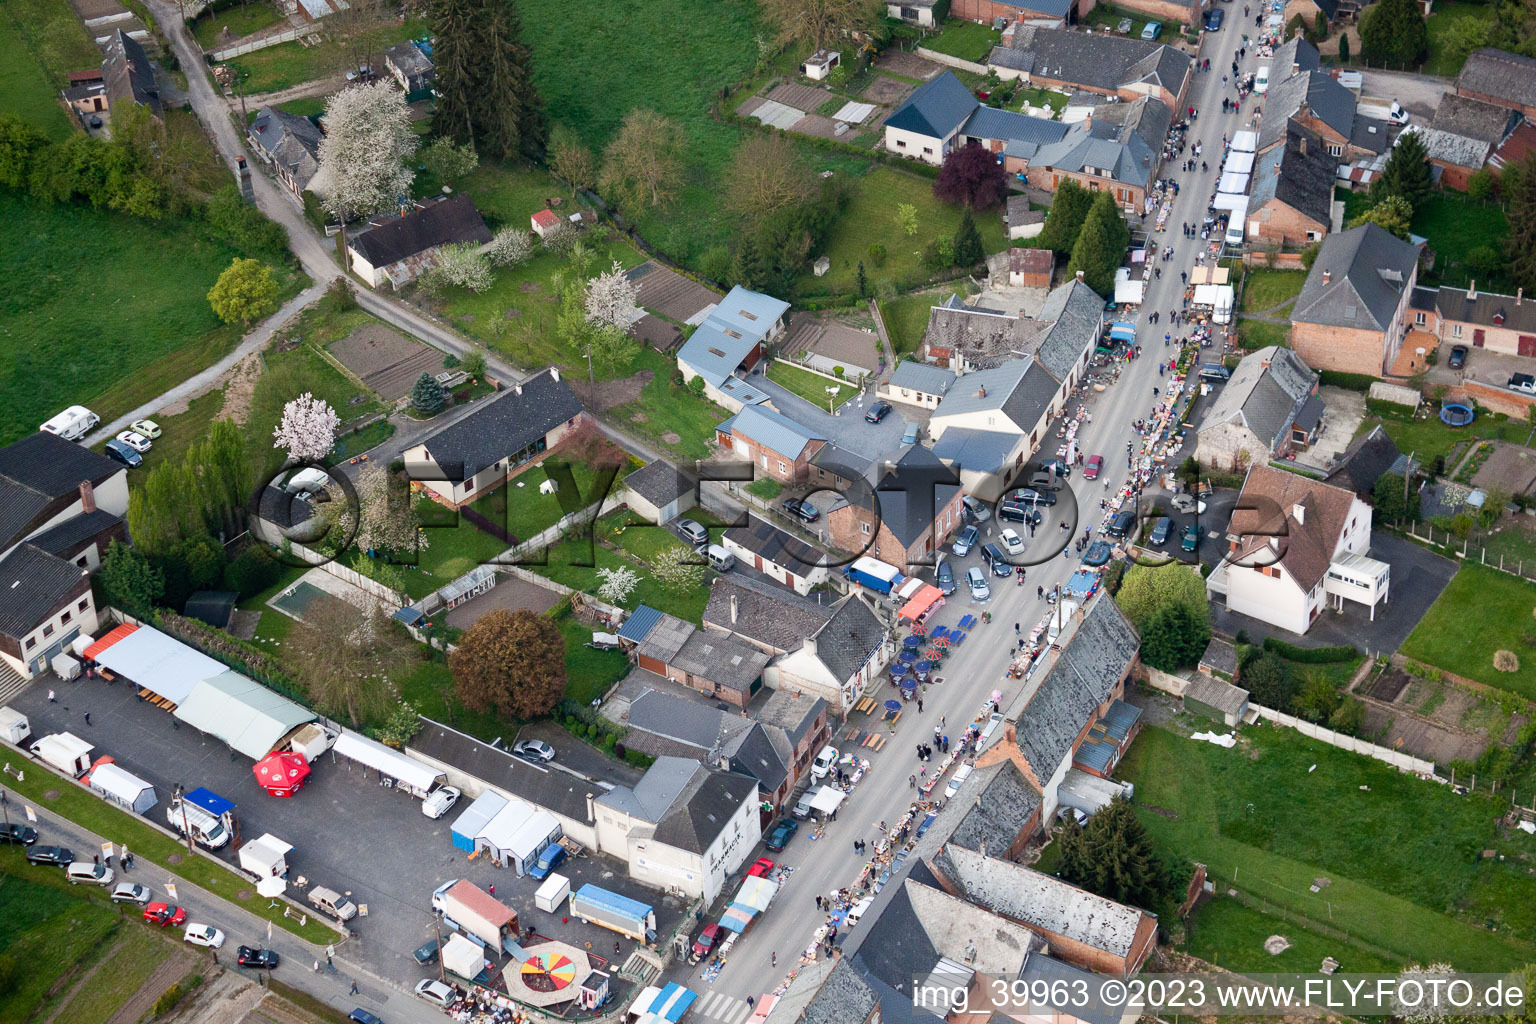 Marly-Gomont in the state Aisne, France from above